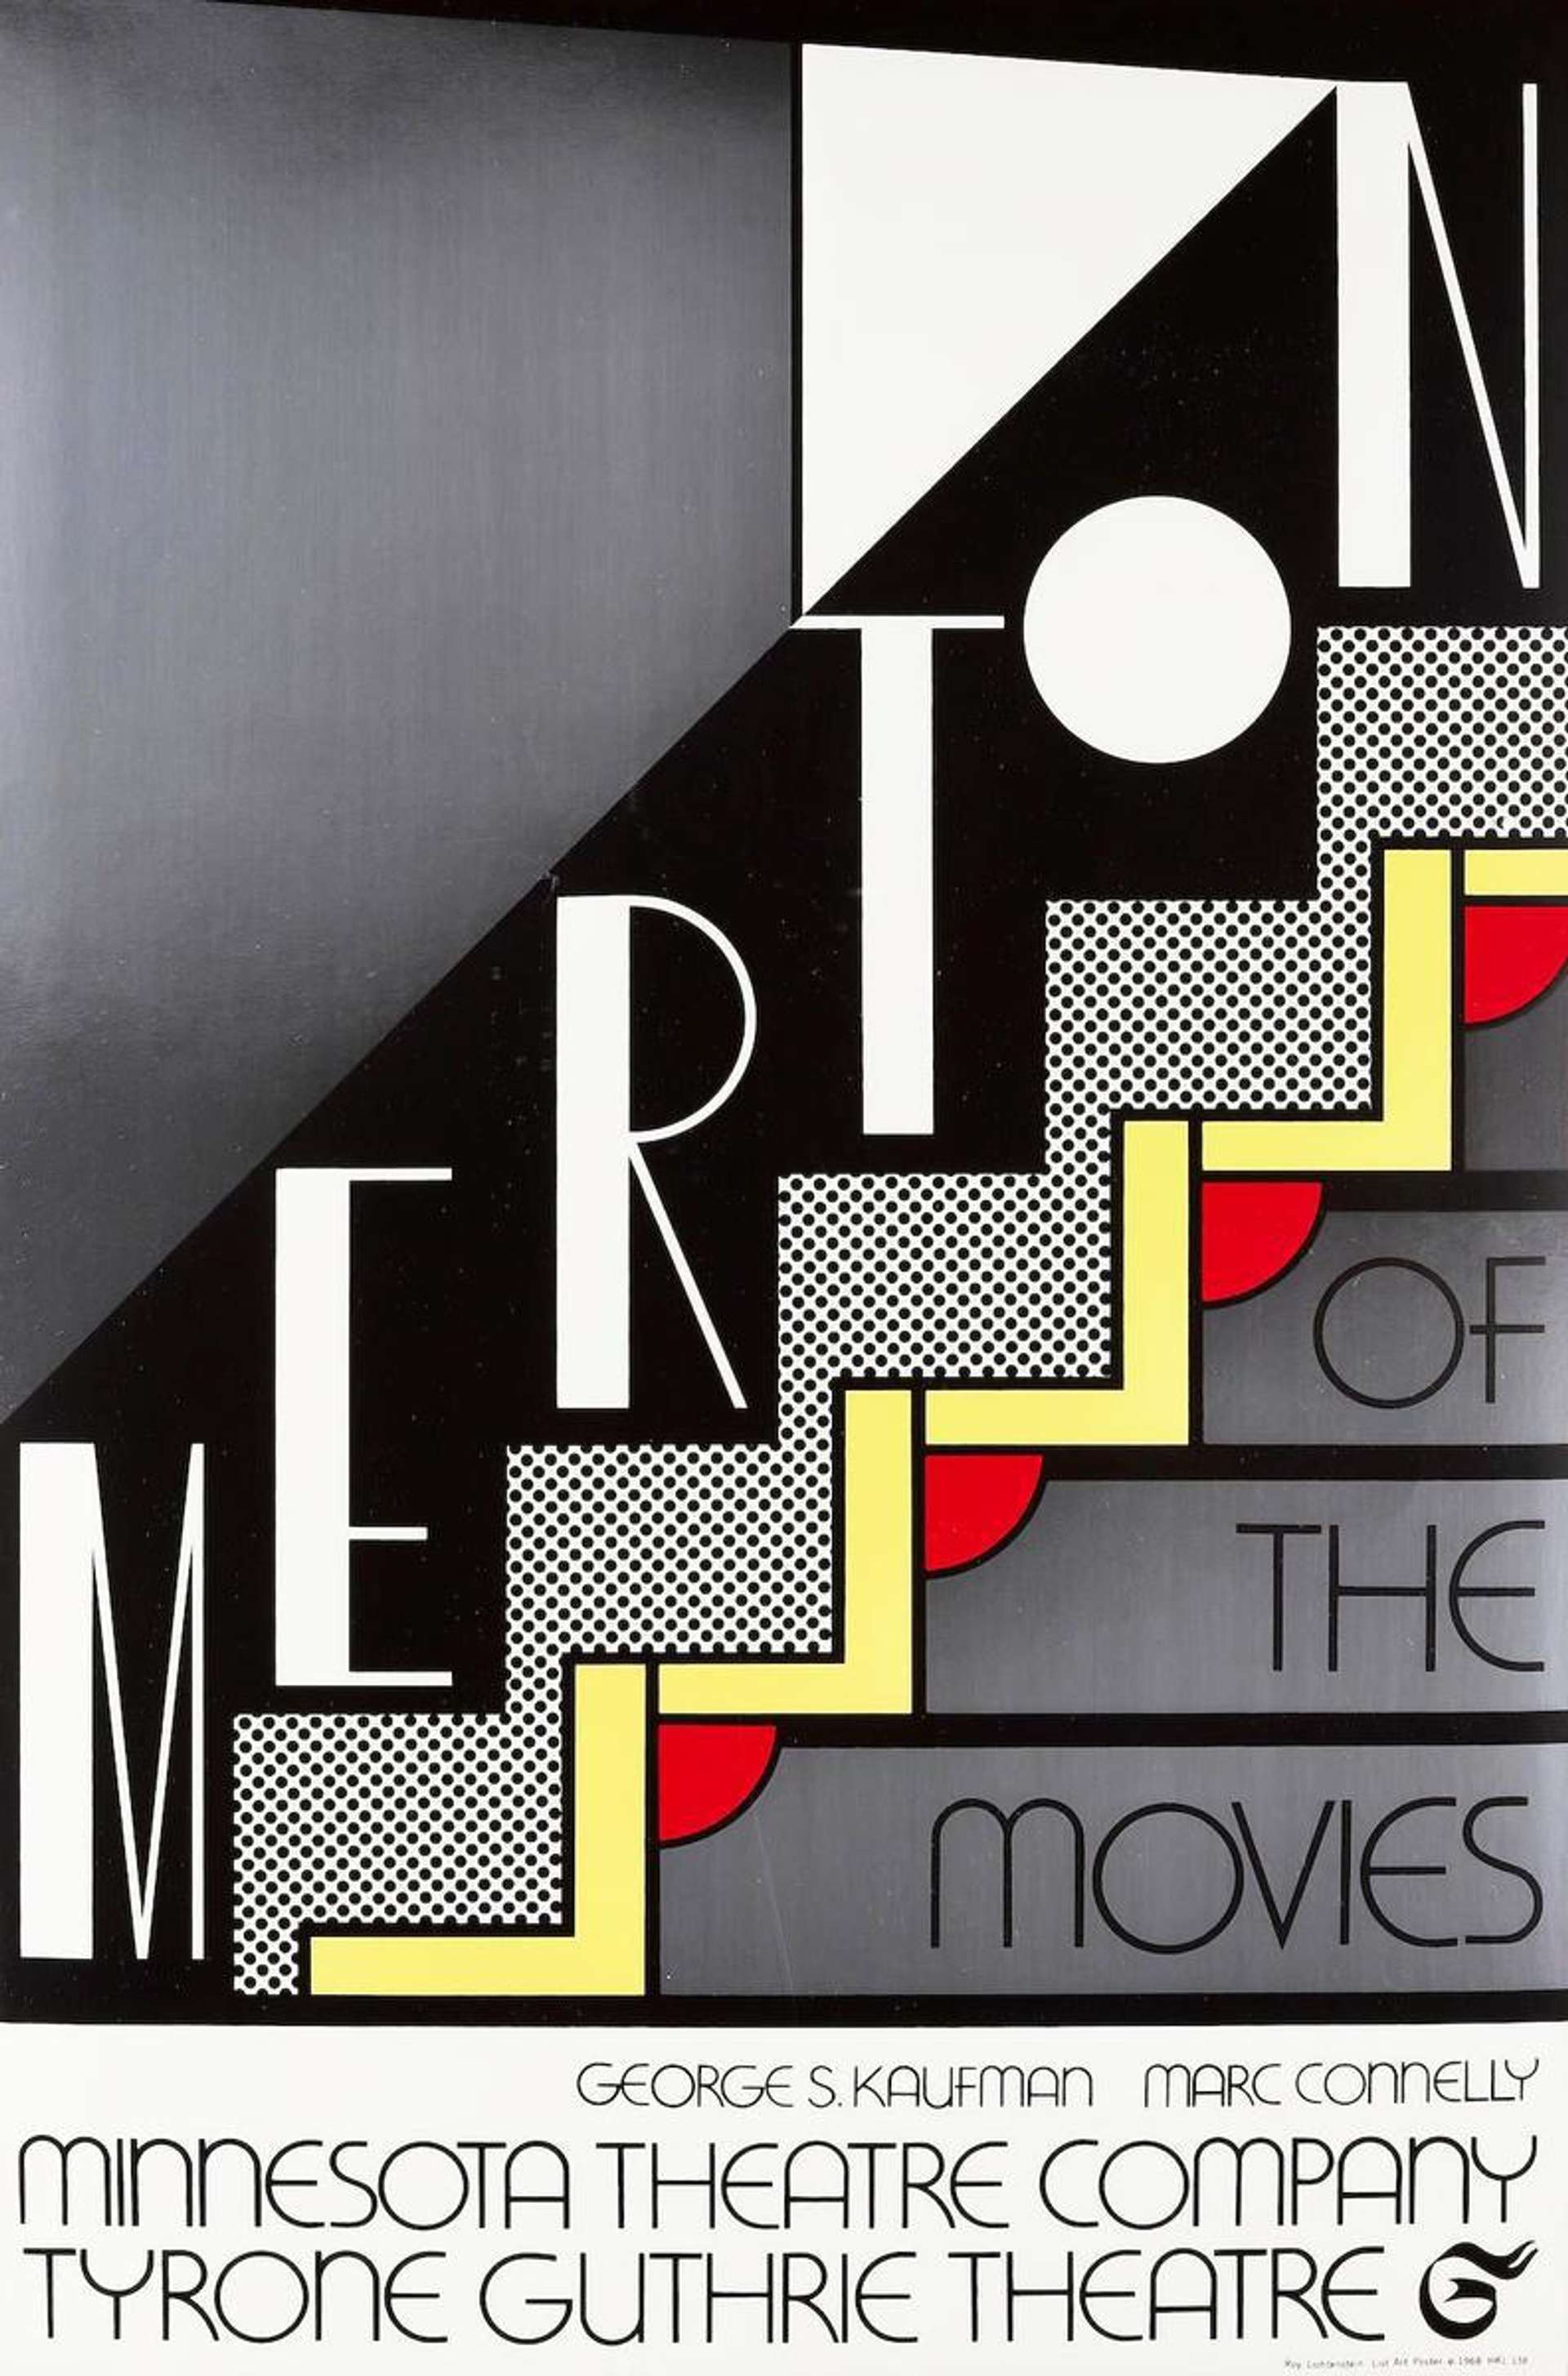 Large scale movie-style poster displaying Merton Of The Movies